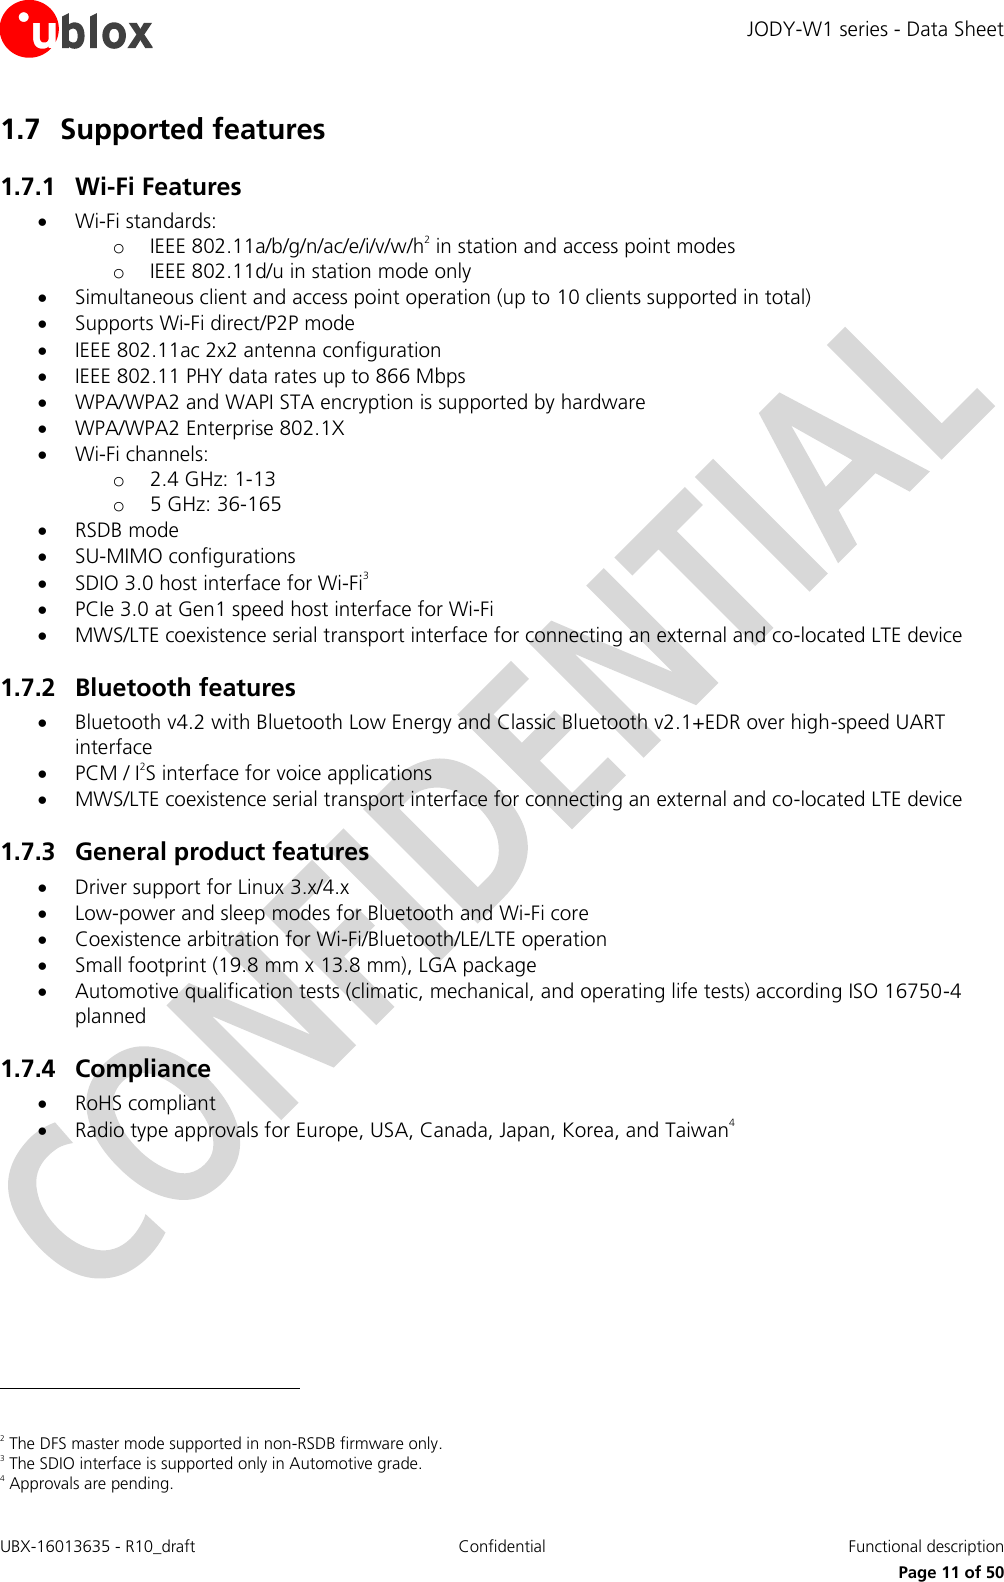 JODY-W1 series - Data Sheet UBX-16013635 - R10_draft Confidential  Functional description     Page 11 of 50 1.7 Supported features 1.7.1 Wi-Fi Features  Wi-Fi standards: o IEEE 802.11a/b/g/n/ac/e/i/v/w/h2 in station and access point modes o IEEE 802.11d/u in station mode only  Simultaneous client and access point operation (up to 10 clients supported in total)  Supports Wi-Fi direct/P2P mode  IEEE 802.11ac 2x2 antenna configuration  IEEE 802.11 PHY data rates up to 866 Mbps  WPA/WPA2 and WAPI STA encryption is supported by hardware  WPA/WPA2 Enterprise 802.1X  Wi-Fi channels: o 2.4 GHz: 1-13 o 5 GHz: 36-165  RSDB mode  SU-MIMO configurations  SDIO 3.0 host interface for Wi-Fi3  PCIe 3.0 at Gen1 speed host interface for Wi-Fi  MWS/LTE coexistence serial transport interface for connecting an external and co-located LTE device 1.7.2 Bluetooth features  Bluetooth v4.2 with Bluetooth Low Energy and Classic Bluetooth v2.1+EDR over high-speed UART interface  PCM / I2S interface for voice applications  MWS/LTE coexistence serial transport interface for connecting an external and co-located LTE device 1.7.3 General product features  Driver support for Linux 3.x/4.x  Low-power and sleep modes for Bluetooth and Wi-Fi core  Coexistence arbitration for Wi-Fi/Bluetooth/LE/LTE operation  Small footprint (19.8 mm x 13.8 mm), LGA package  Automotive qualification tests (climatic, mechanical, and operating life tests) according ISO 16750-4 planned  1.7.4 Compliance  RoHS compliant  Radio type approvals for Europe, USA, Canada, Japan, Korea, and Taiwan4                                                         2 The DFS master mode supported in non-RSDB firmware only. 3 The SDIO interface is supported only in Automotive grade. 4 Approvals are pending. 